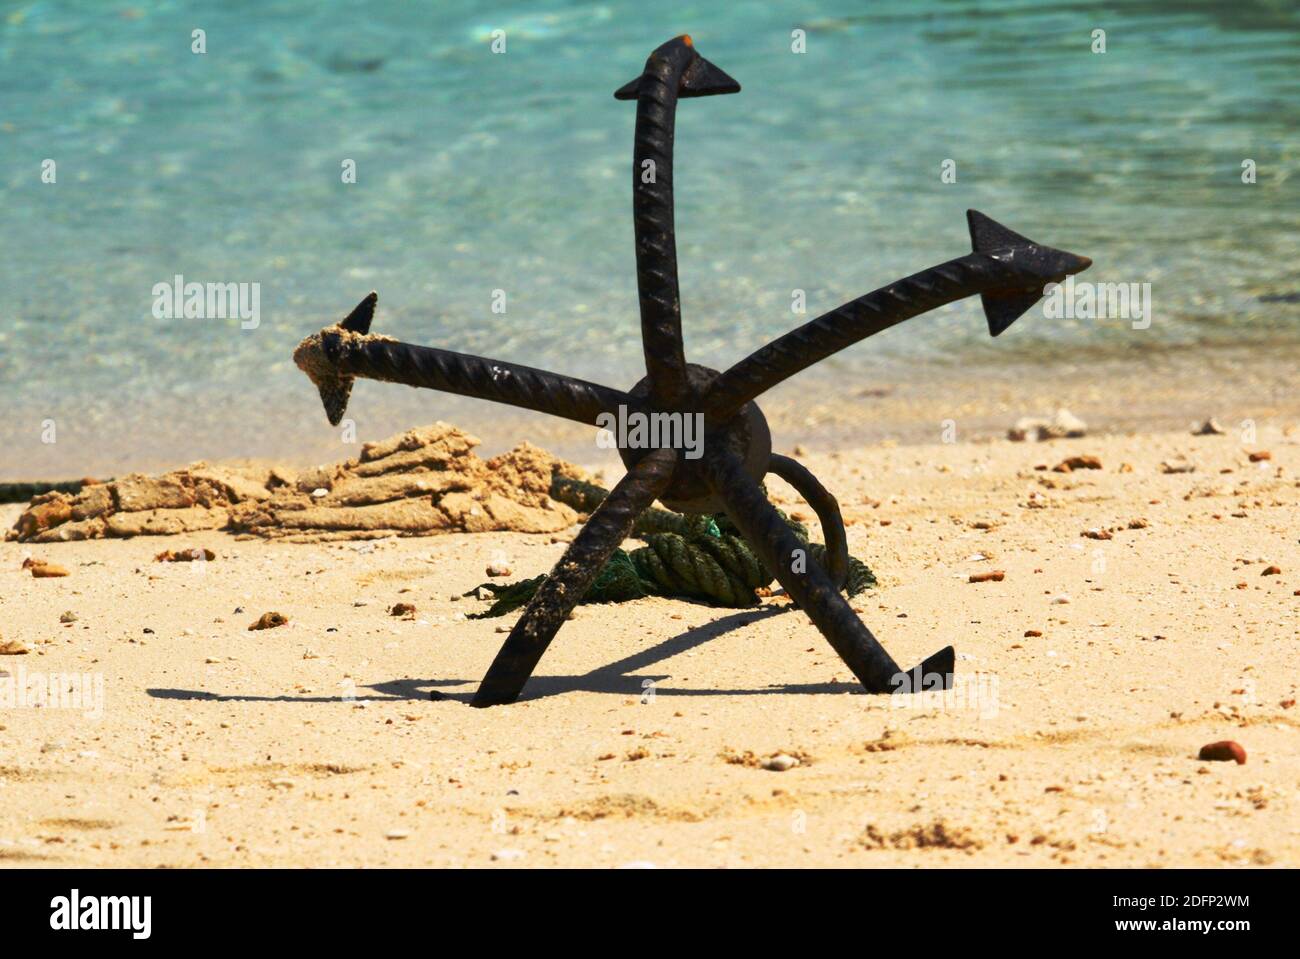 A five-pointed anchor resting in the sand on a beach in Stone Town, Zanzibar. Stock Photo